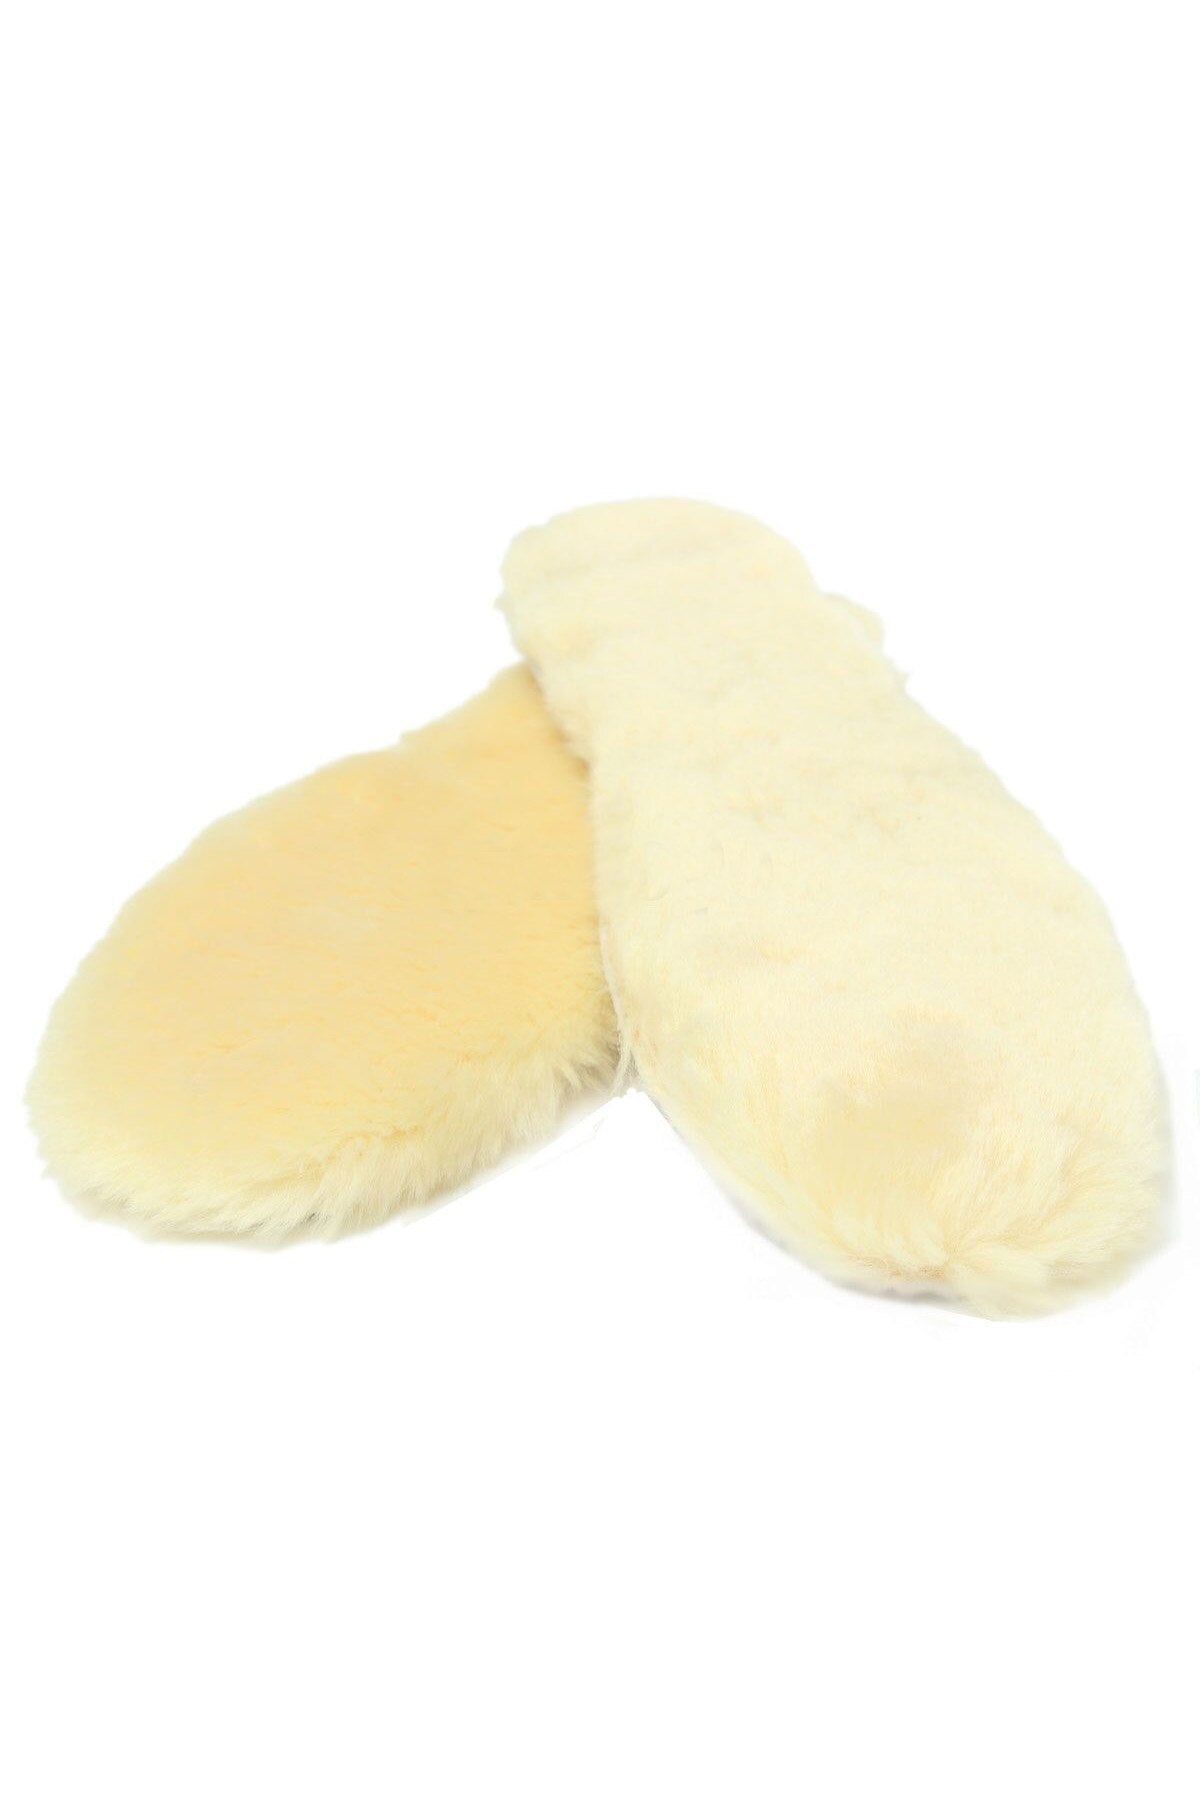 Men Women Insoles Pads Replacement For Winter Shoes Boots Rainboots Yellow - ebowsos